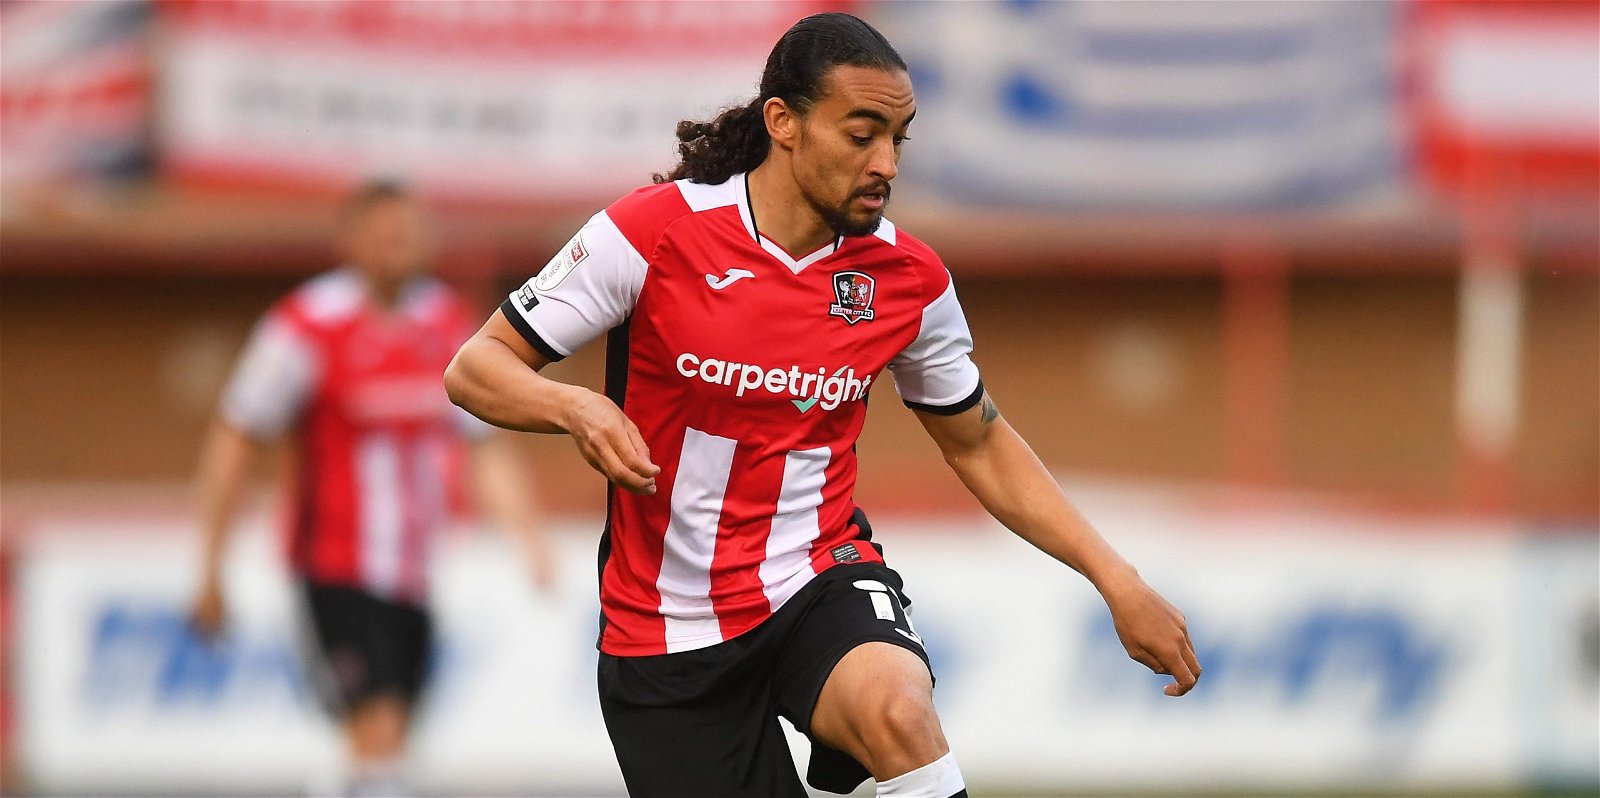 Exeter City Barnsley Hull City Stoke City, Exeter City lodge contract offer to winger